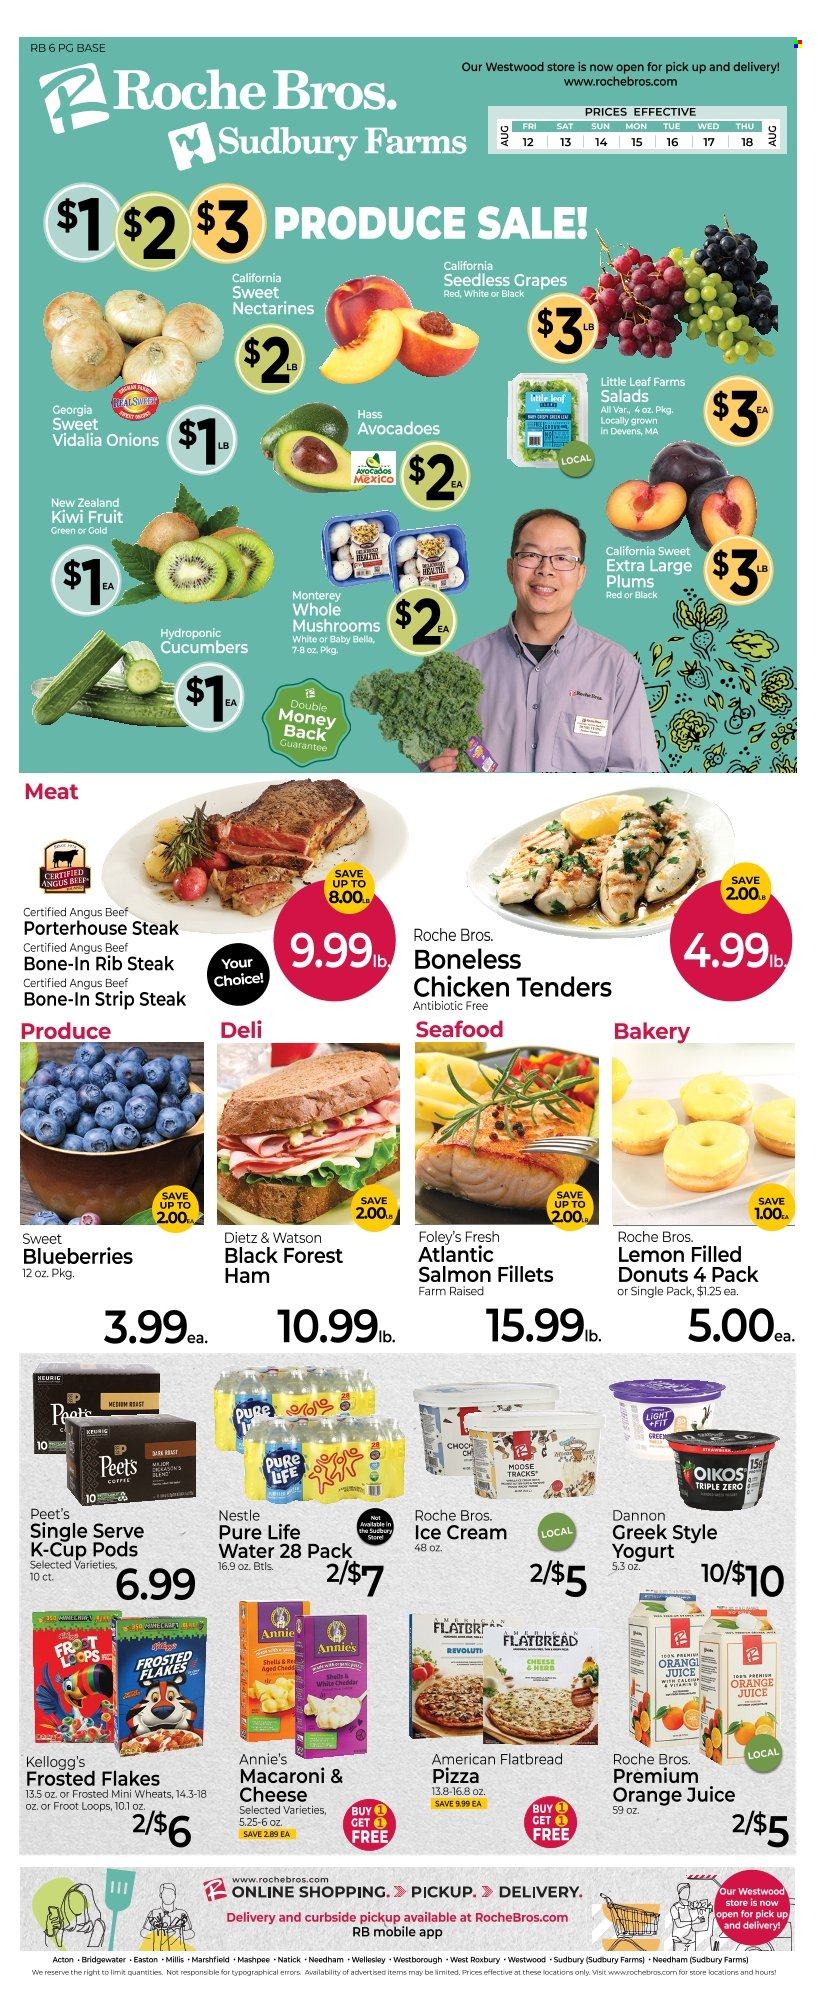 thumbnail - Roche Bros. Flyer - 08/12/2022 - 08/18/2022 - Sales products - flatbread, donut, cucumber, onion, avocado, blueberries, grapes, kiwi, seedless grapes, plums, salmon, salmon fillet, seafood, macaroni & cheese, pizza, chicken tenders, Annie's, ham, Dietz & Watson, yoghurt, Oikos, Dannon, ice cream, Nestlé, Kellogg's, Frosted Flakes, orange juice, juice, Pure Life Water, coffee capsules, K-Cups, Keurig, beef meat, steak, striploin steak, beef bone, nectarines. Page 1.